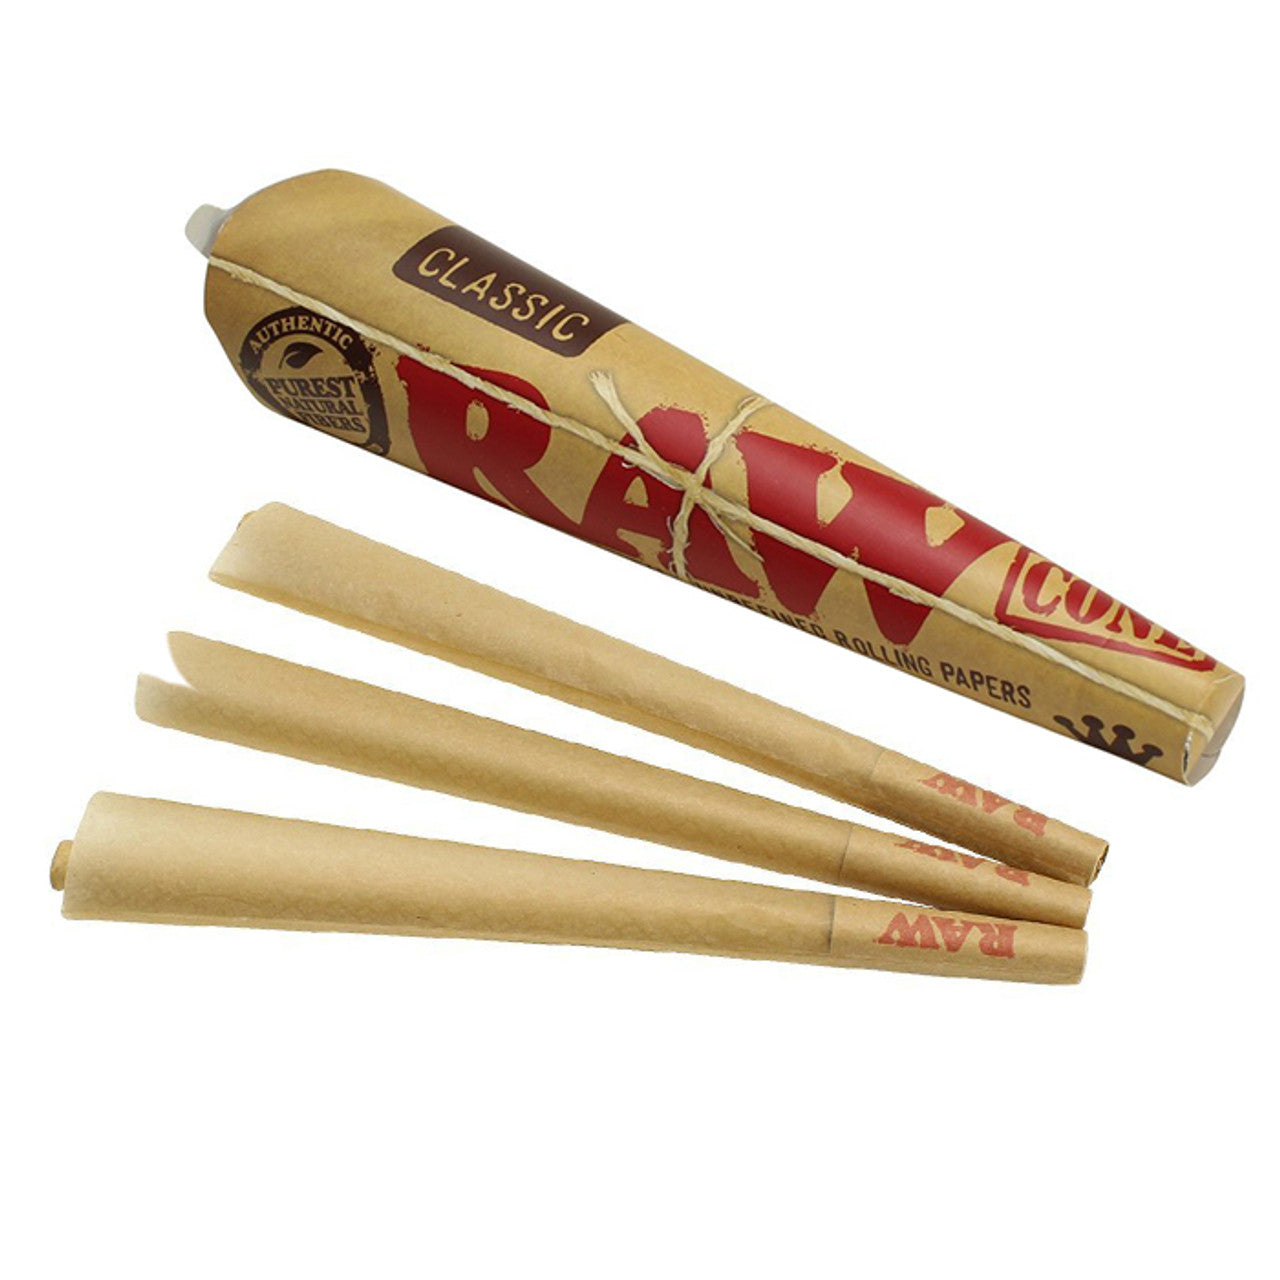 RAW Classic Pre-Rolled Cone King Size (3ct)